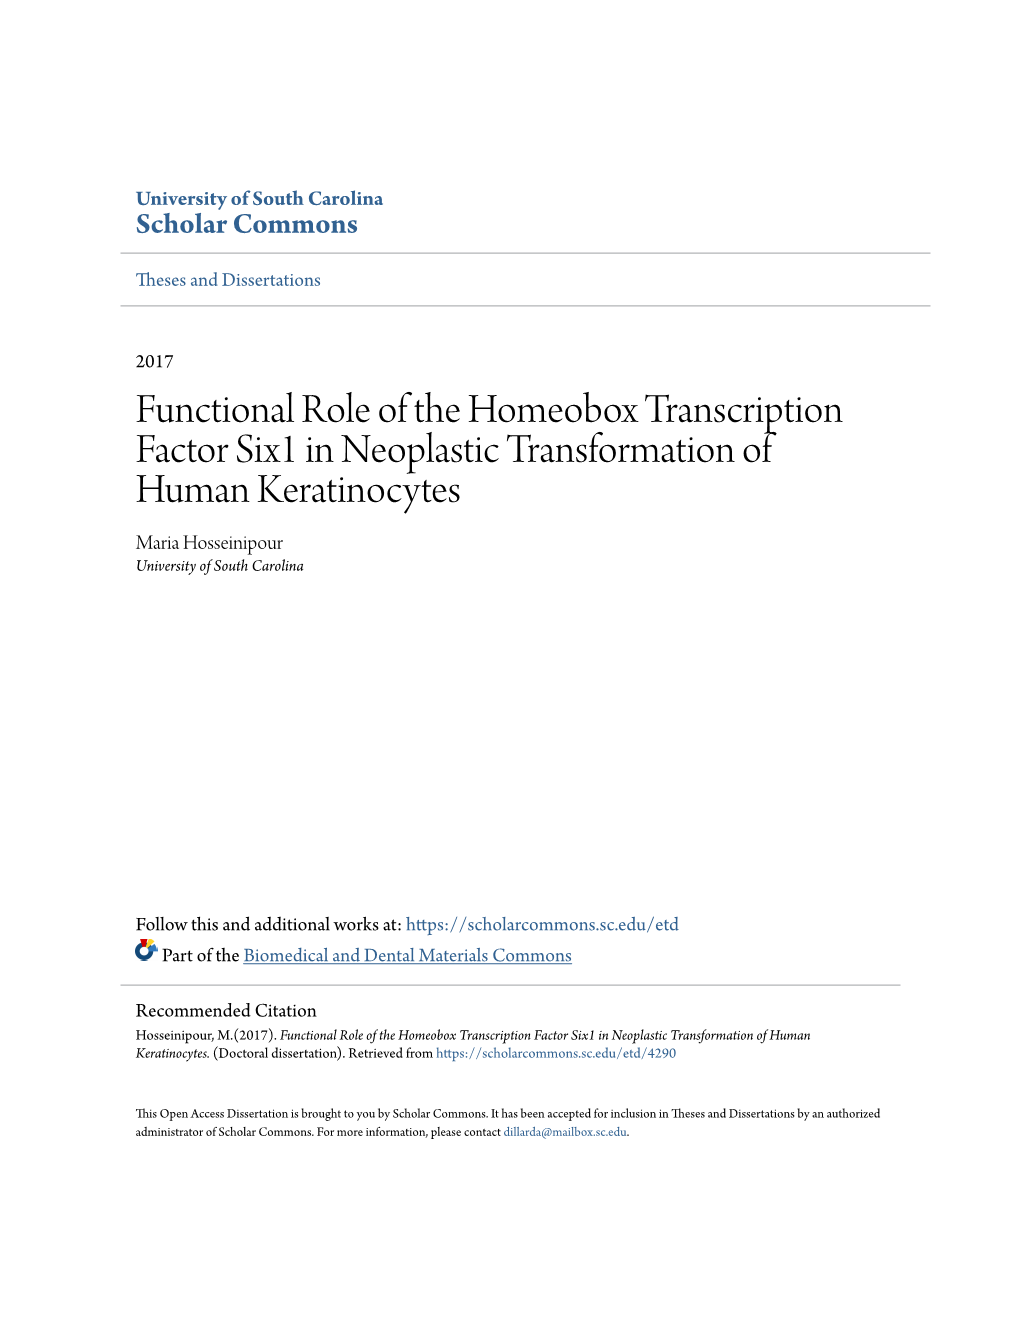 Functional Role of the Homeobox Transcription Factor Six1 in Neoplastic Transformation of Human Keratinocytes Maria Hosseinipour University of South Carolina